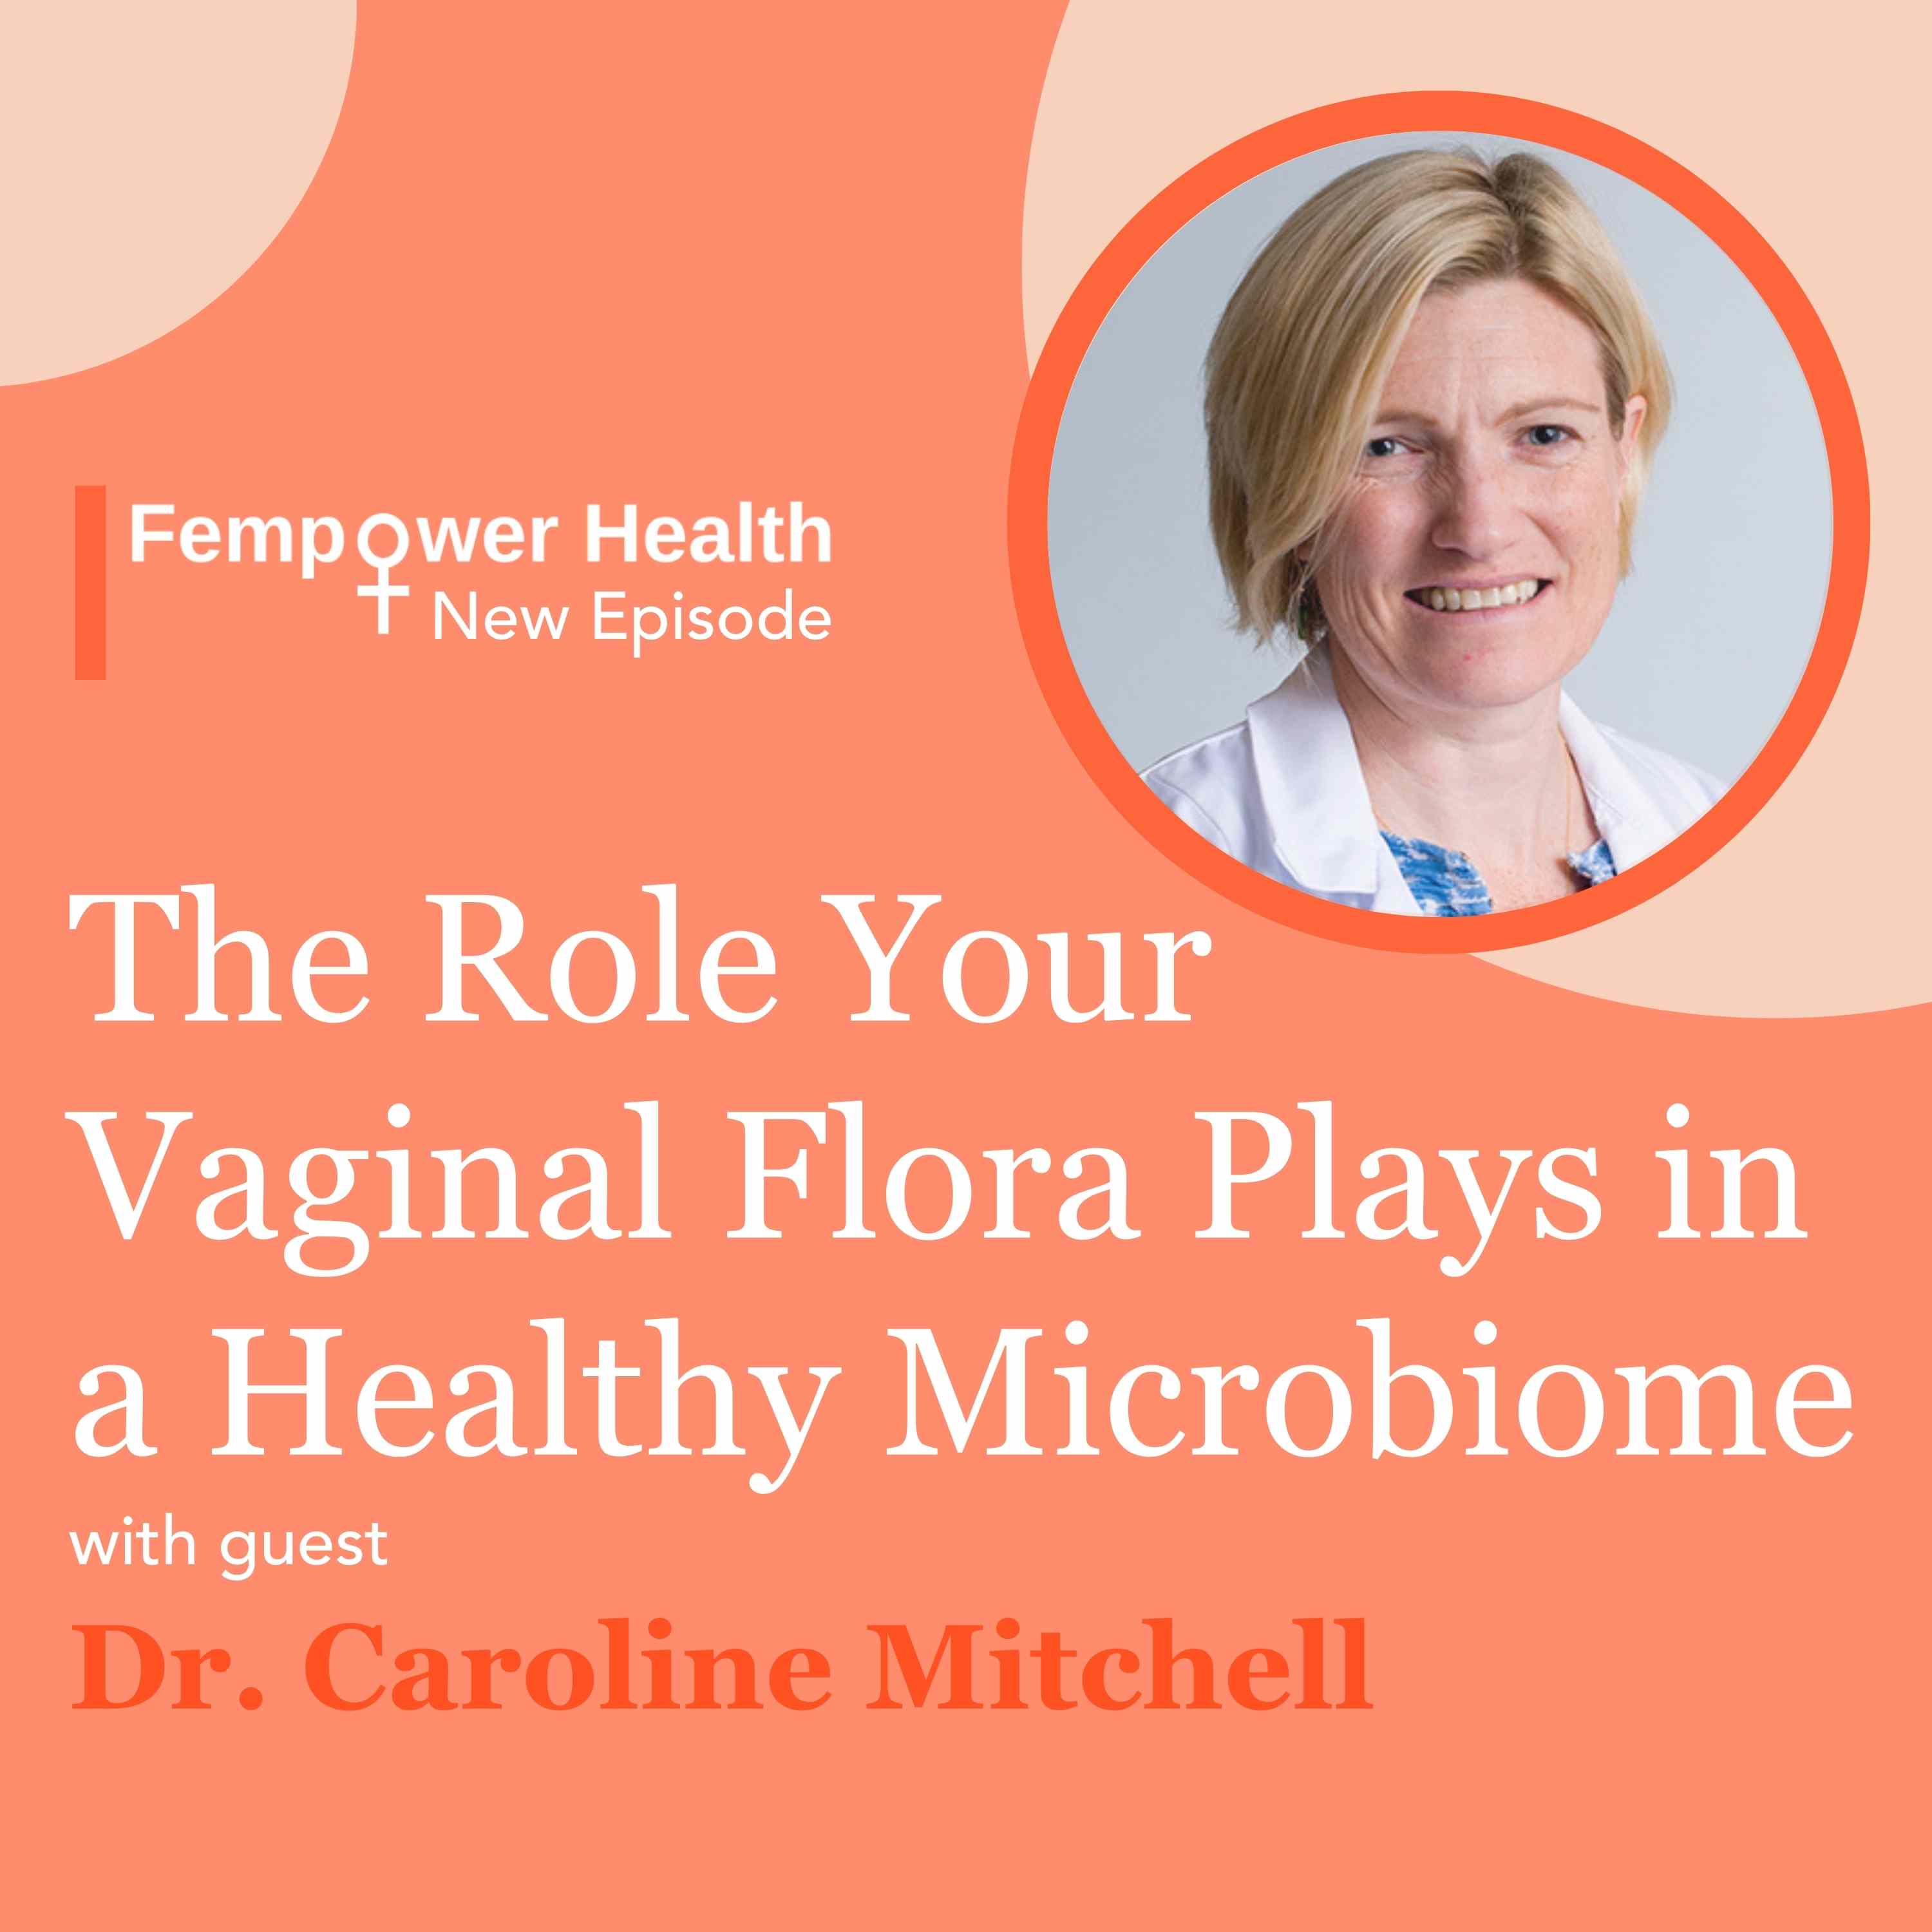 The Role Your Vaginal Flora Plays in a Healthy Microbiome | Dr. Caroline Mitchell